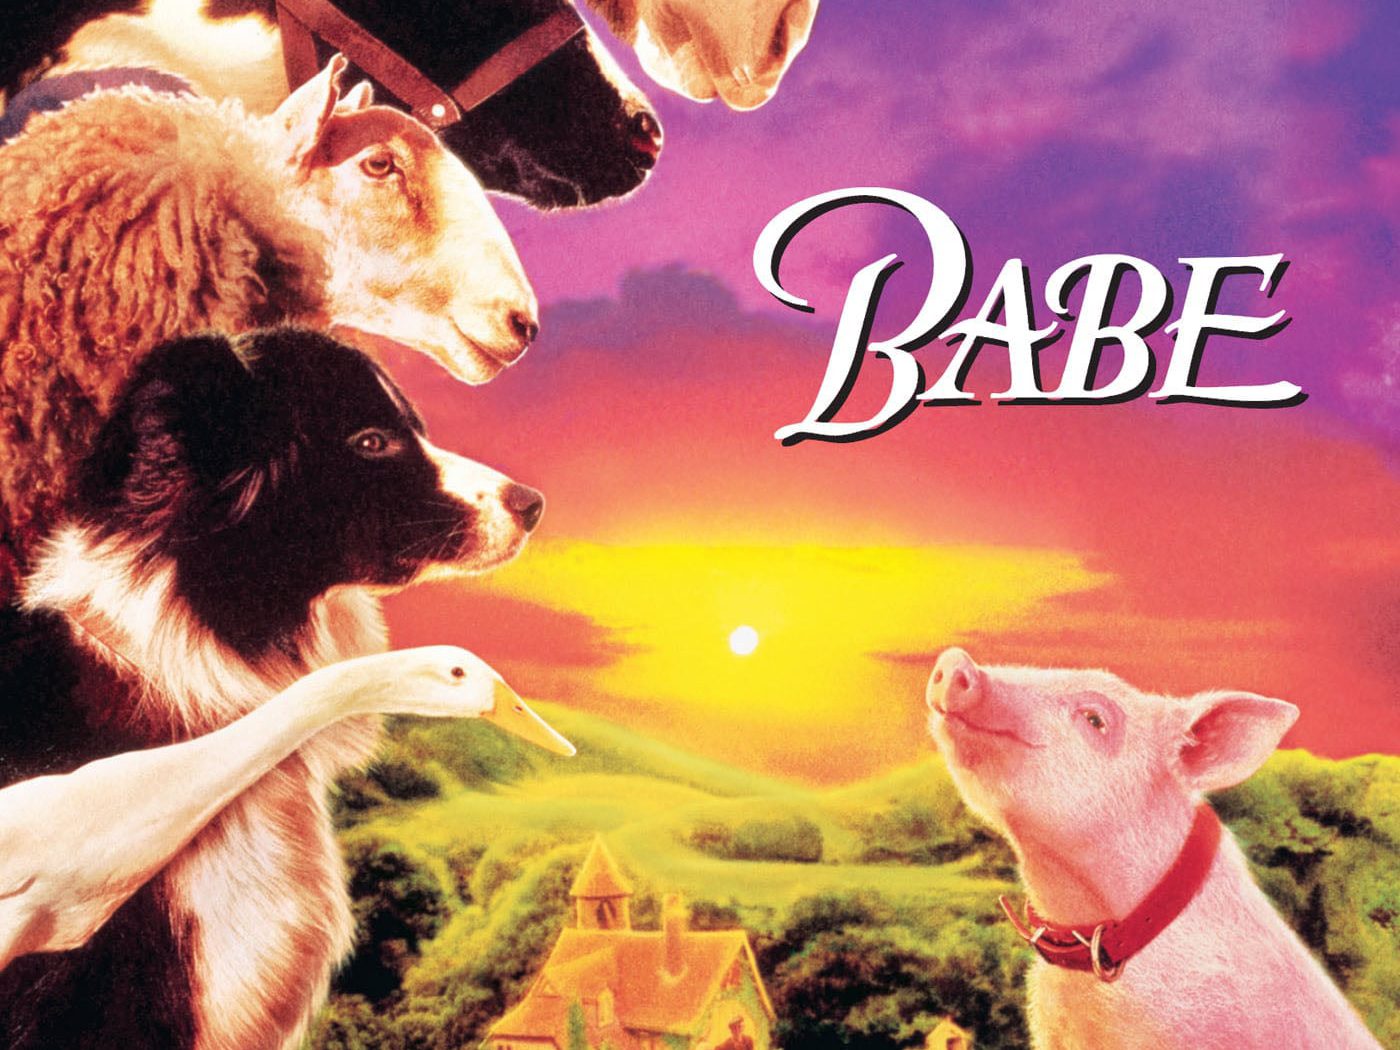 Poster for the movie "Babe"